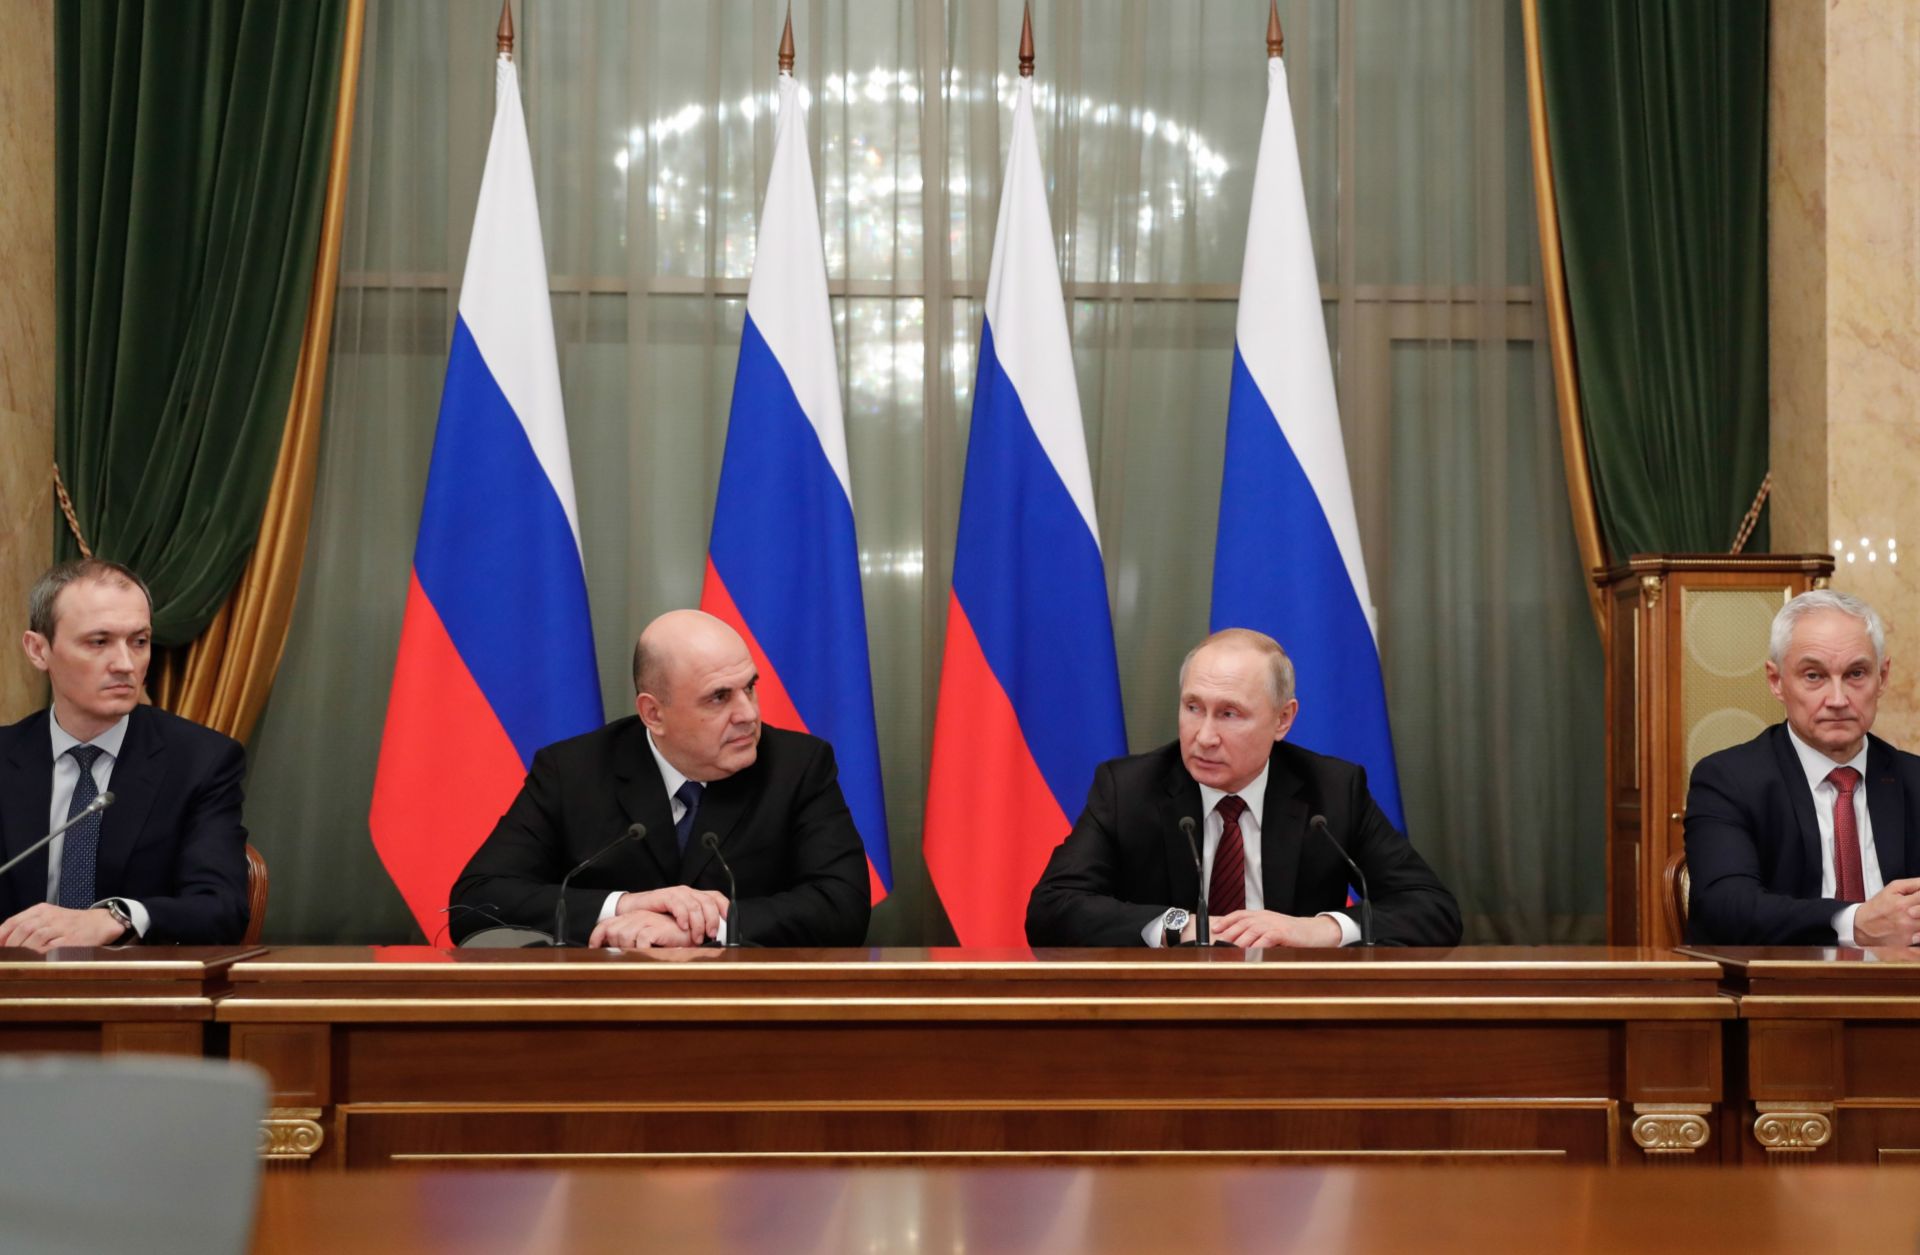 Russian President Vladimir Putin (2R) and Prime Minister Mikhail Mishustin (2L) meet with members of the new government in Moscow on Jan. 21, 2020. 